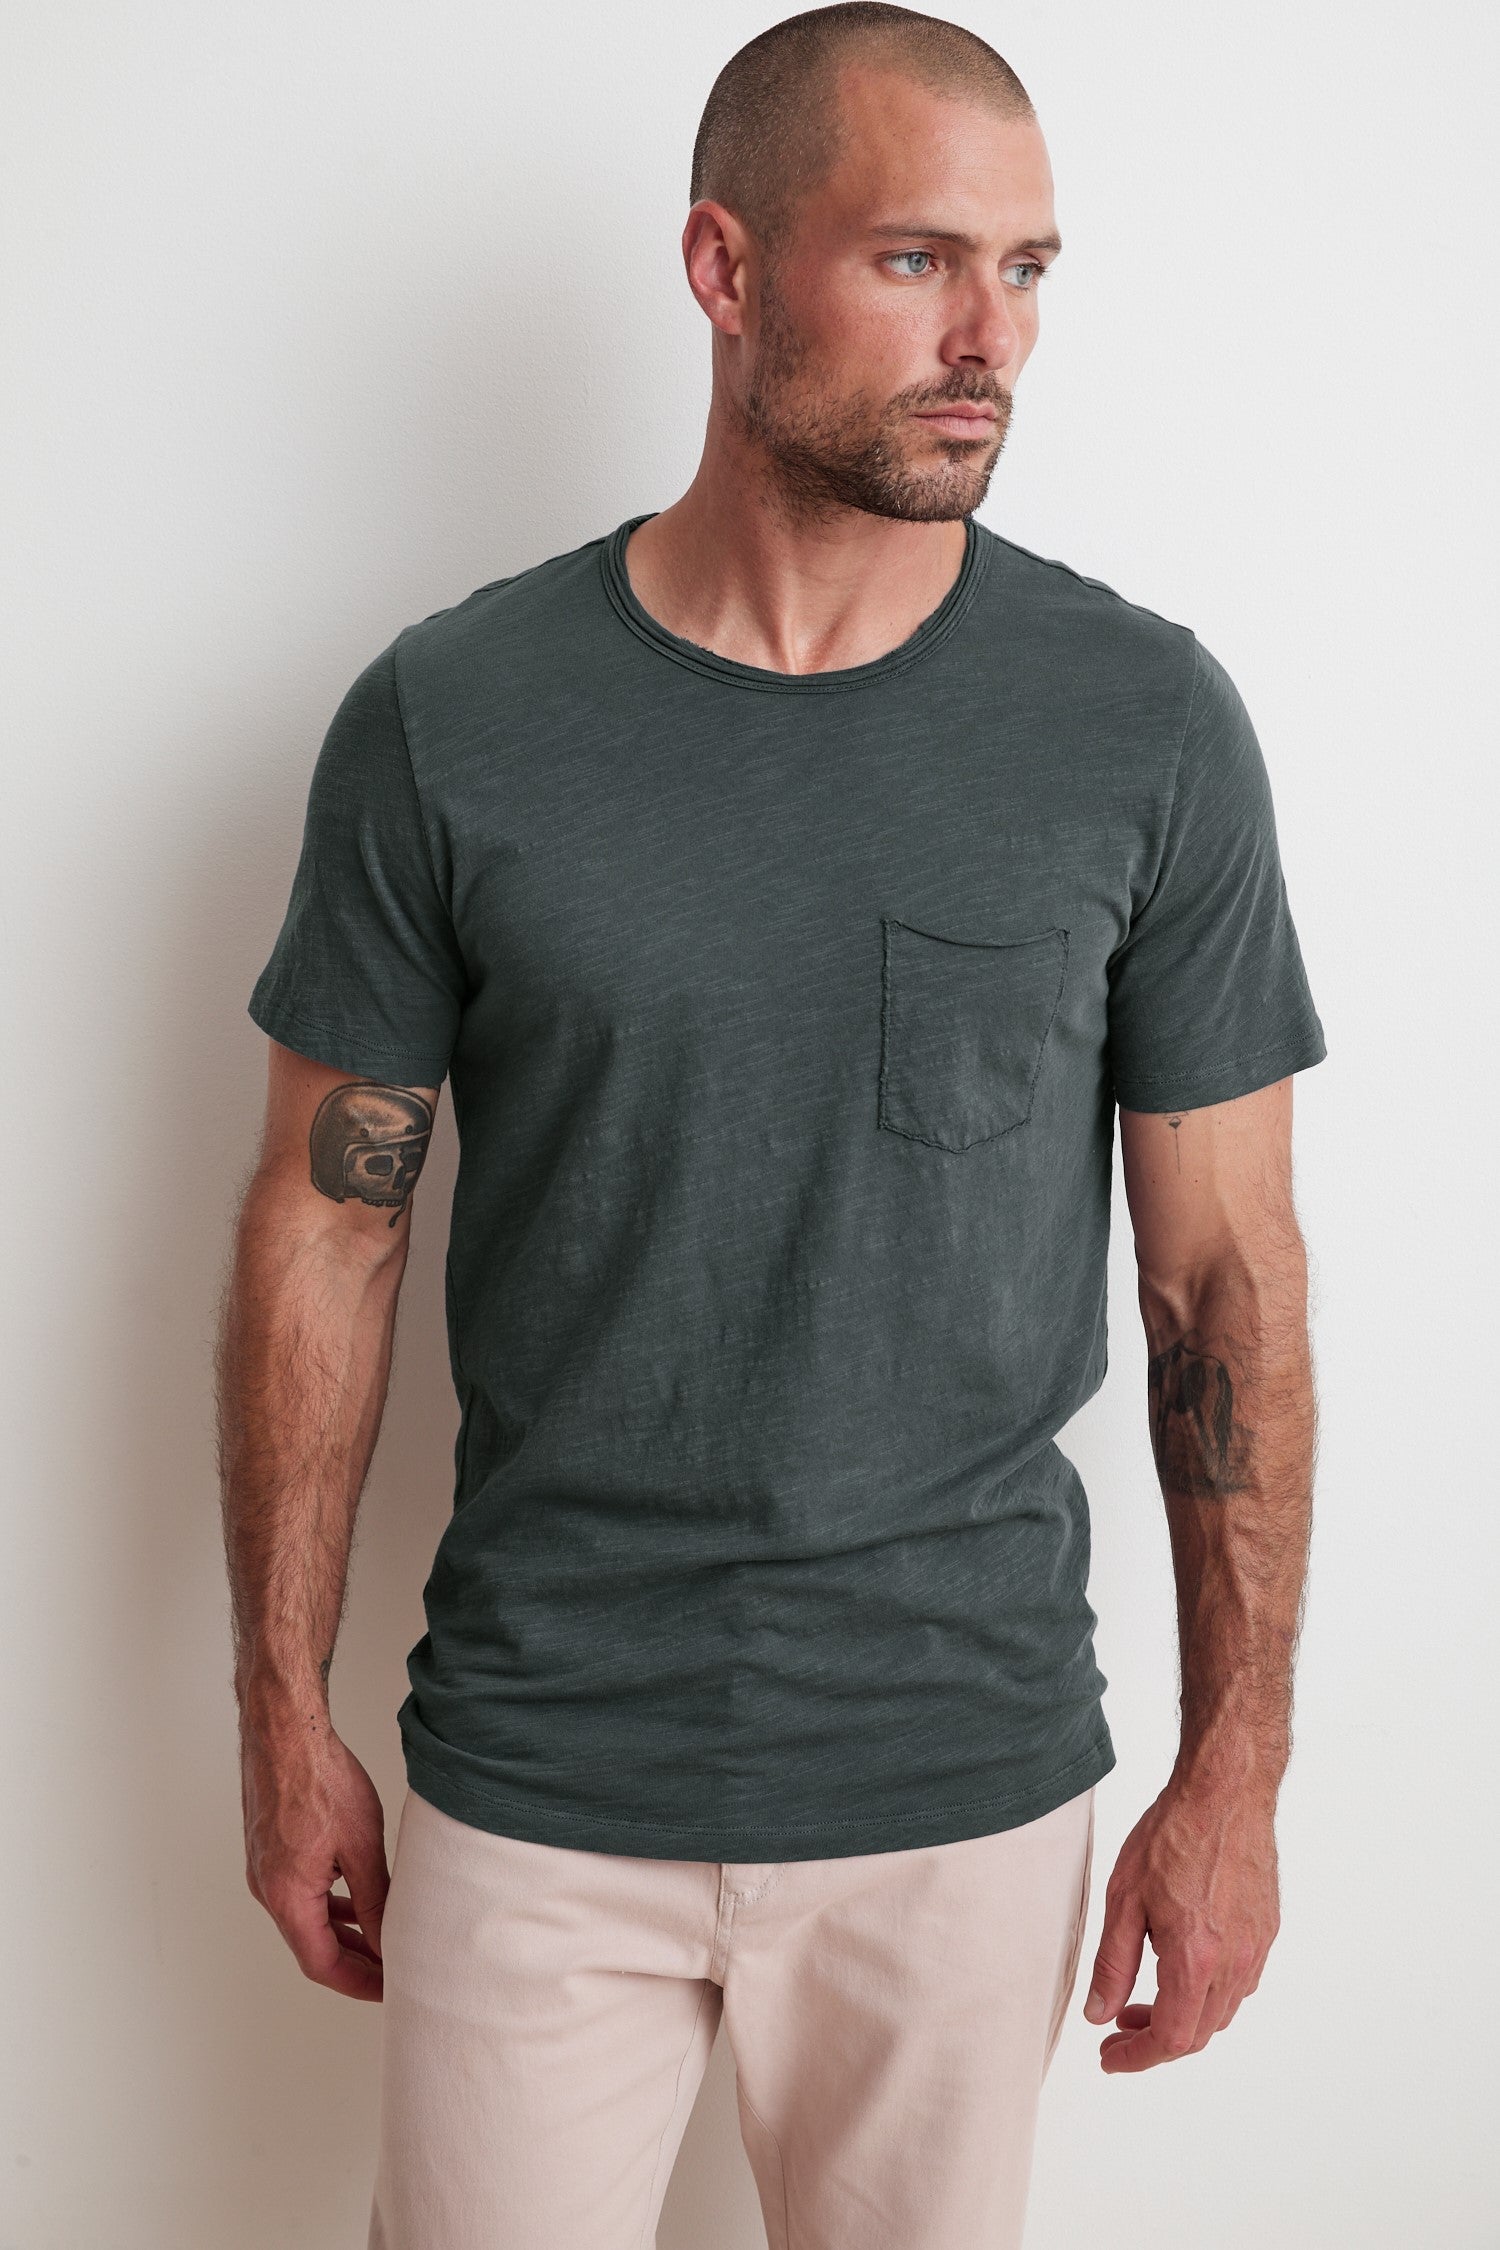   A man with short hair and a beard wearing a dark green CHAD TEE from Velvet by Graham & Spencer made from textured cotton slub and light-colored pants stands against a plain white wall, looking to his right. He has tattoos on his right arm. 